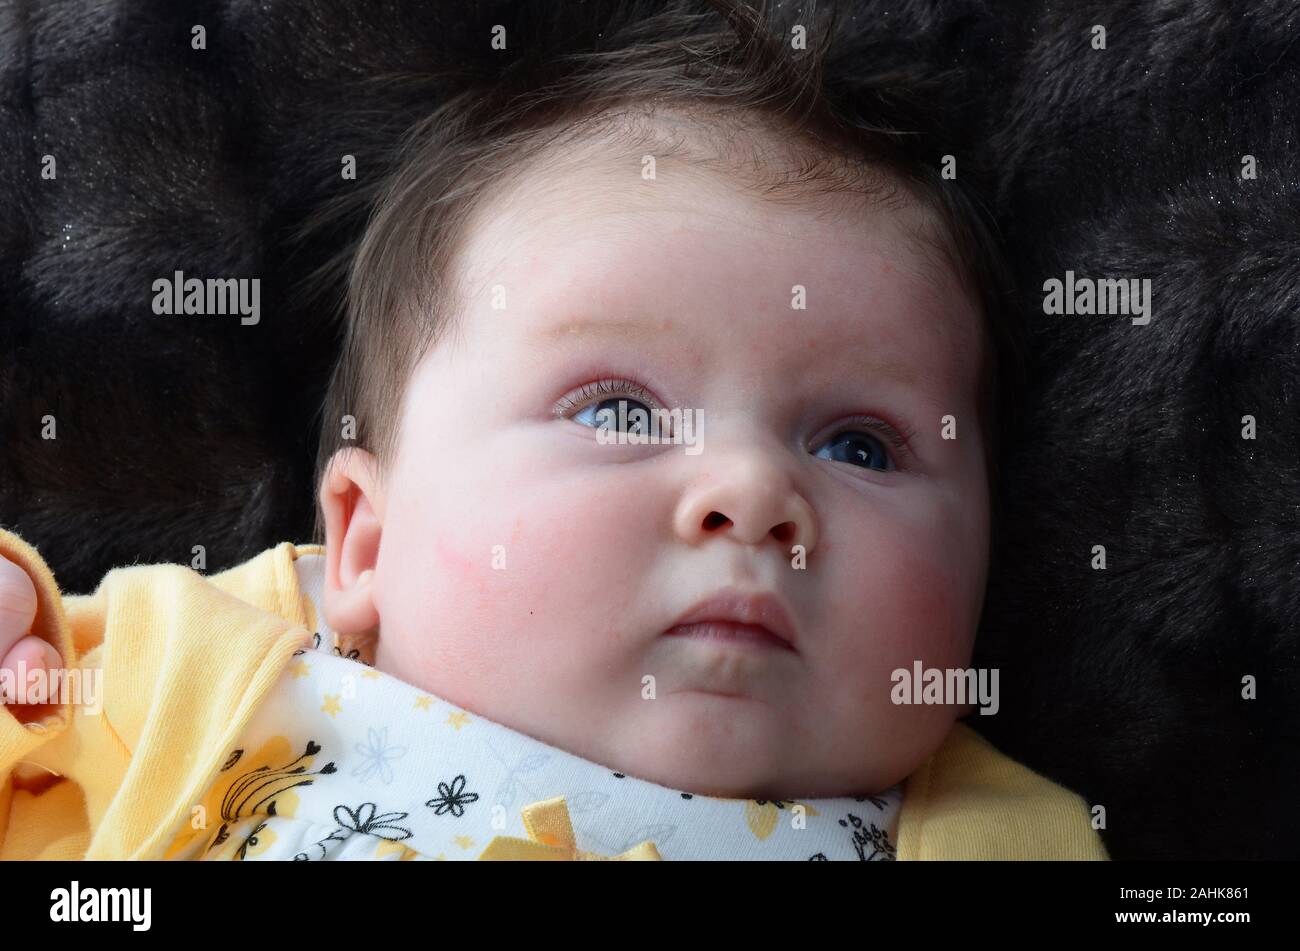 New Baby, parenting and child care Stock Photo